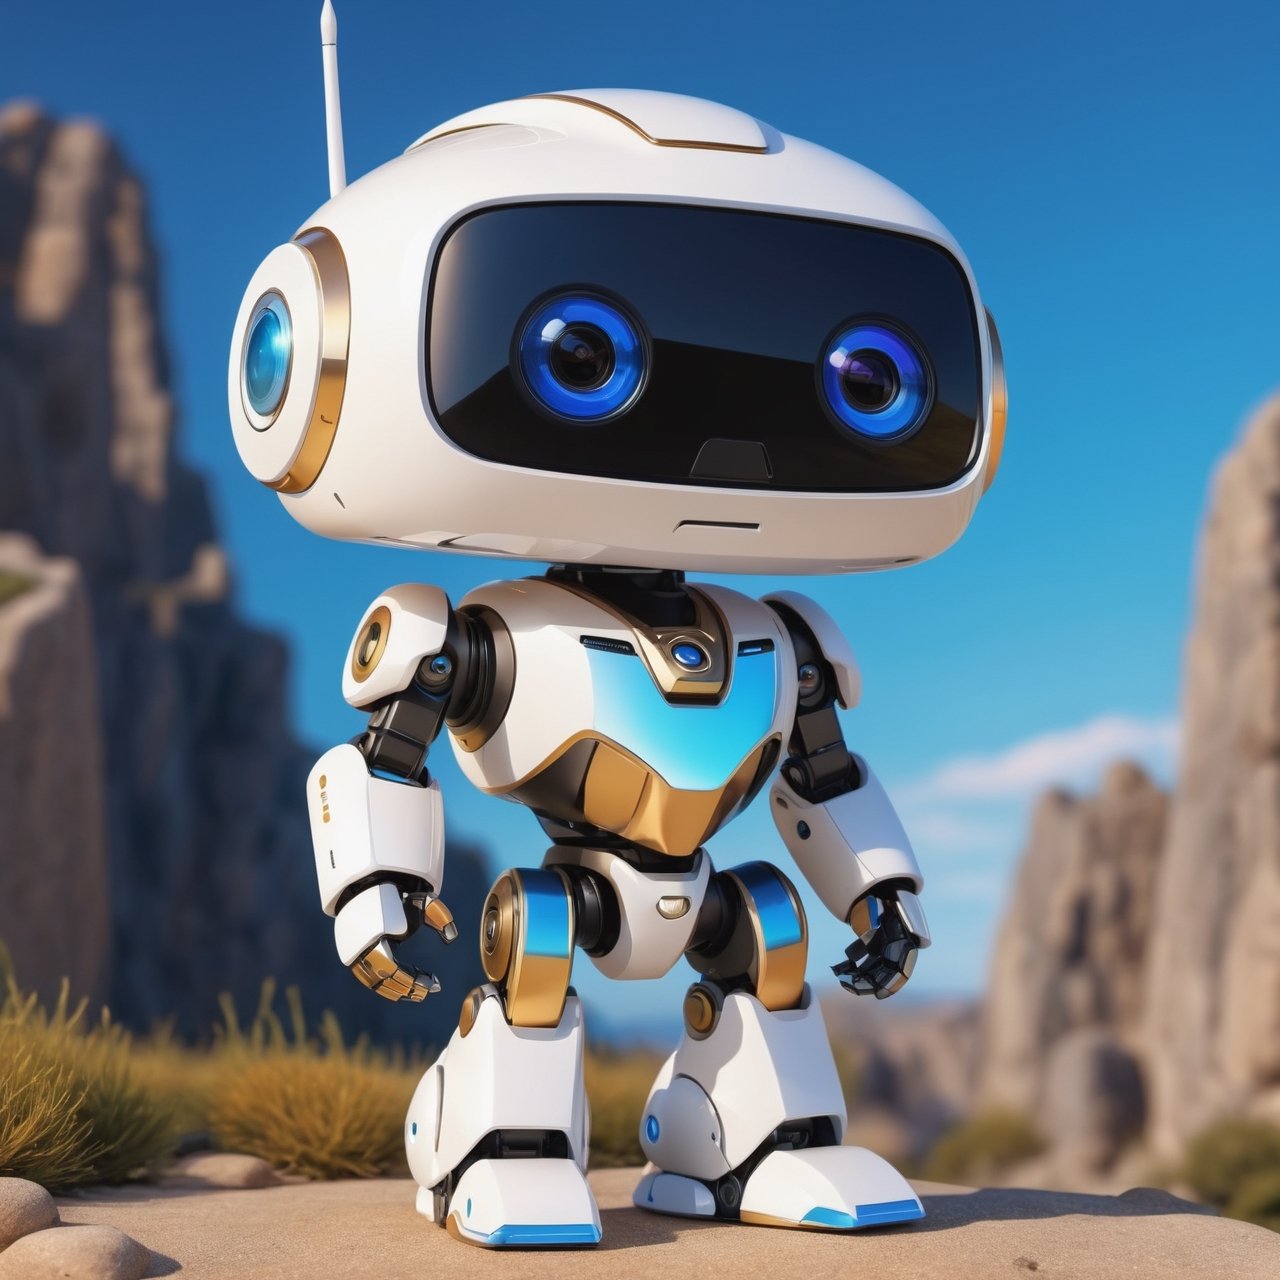 (masterpiece:1.2, highest quality), (realistic, photo_realistic:1.9)
1chibi_robot, Cute chibi robot, happy face, (Designer look holding a paintbrush in one hand), white with blue, (detailed background), (gradients), colorful, detailed landscape, visual key, shiny skin. Modern place, Action camera. Portrait film. Standard lens. Golden hour lighting.
sharp focus, 8k, UHD, high quality, frowning, intricate detailed, highly detailed, hyper-realistic,interior,robot white with blue,chibi emote style,Monster